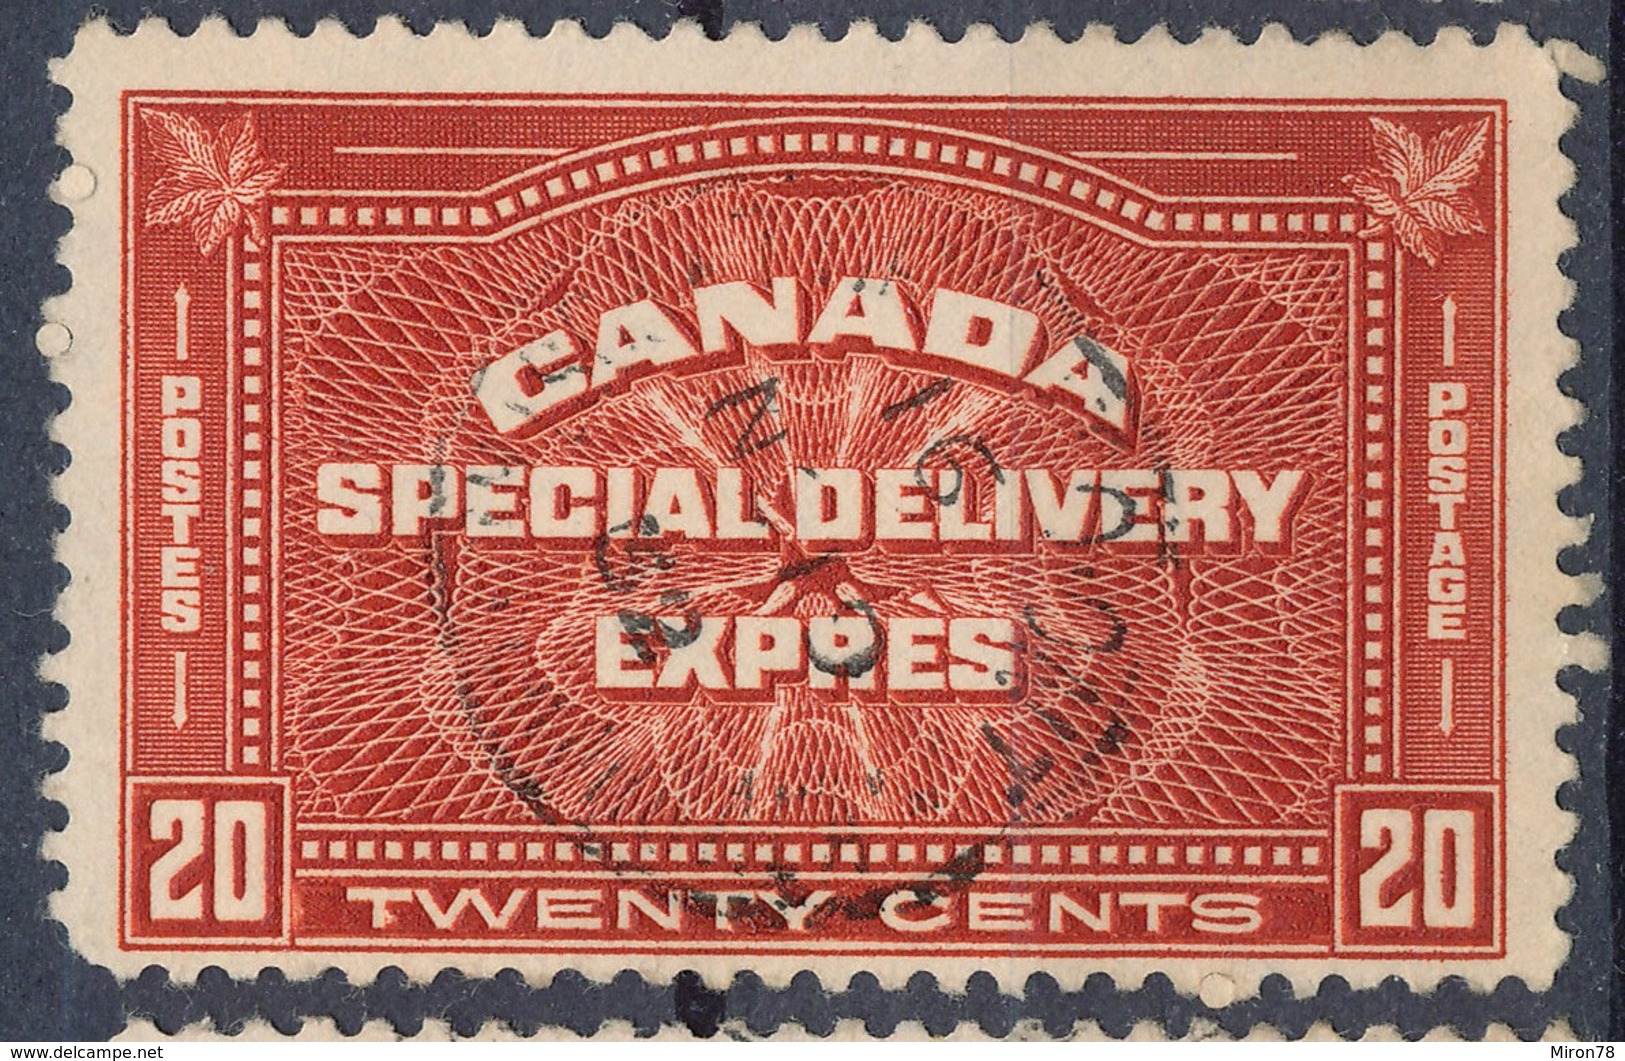 Stamp Canada  1930 20c Used - Special Delivery